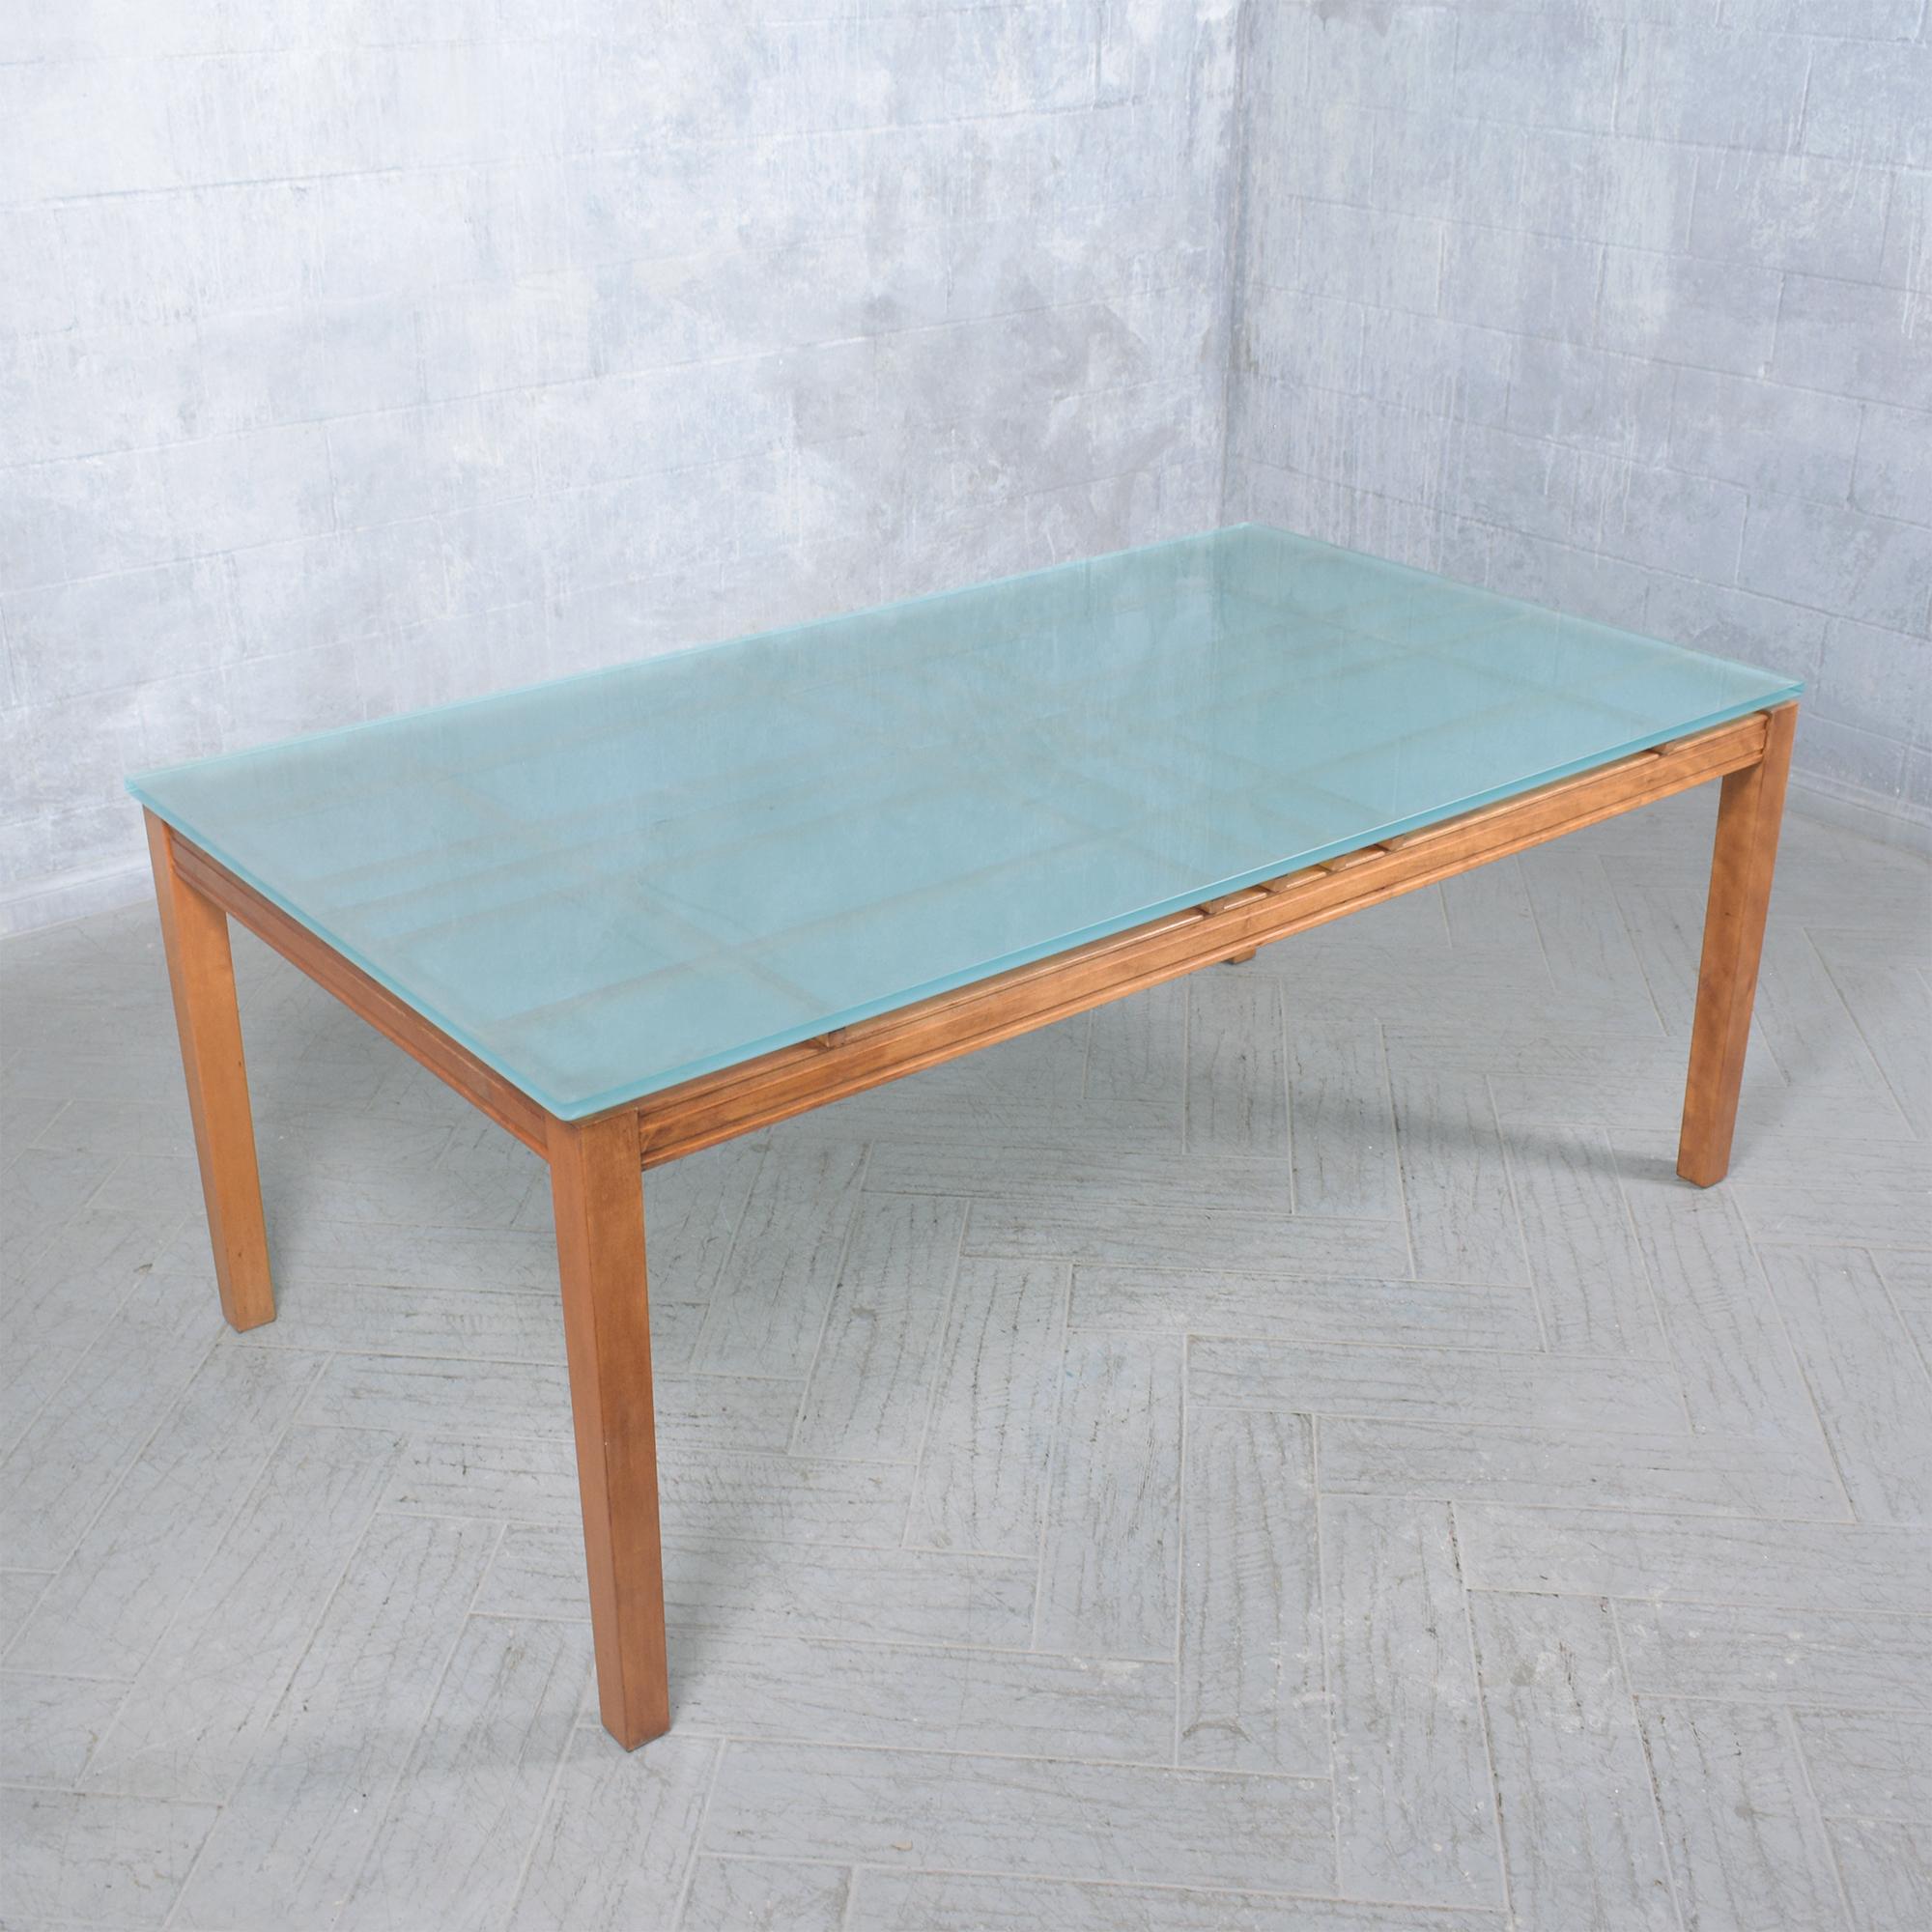 Late 20th Century 1980s Modern Maple Wood Dining Table with Frosted Glass Top For Sale